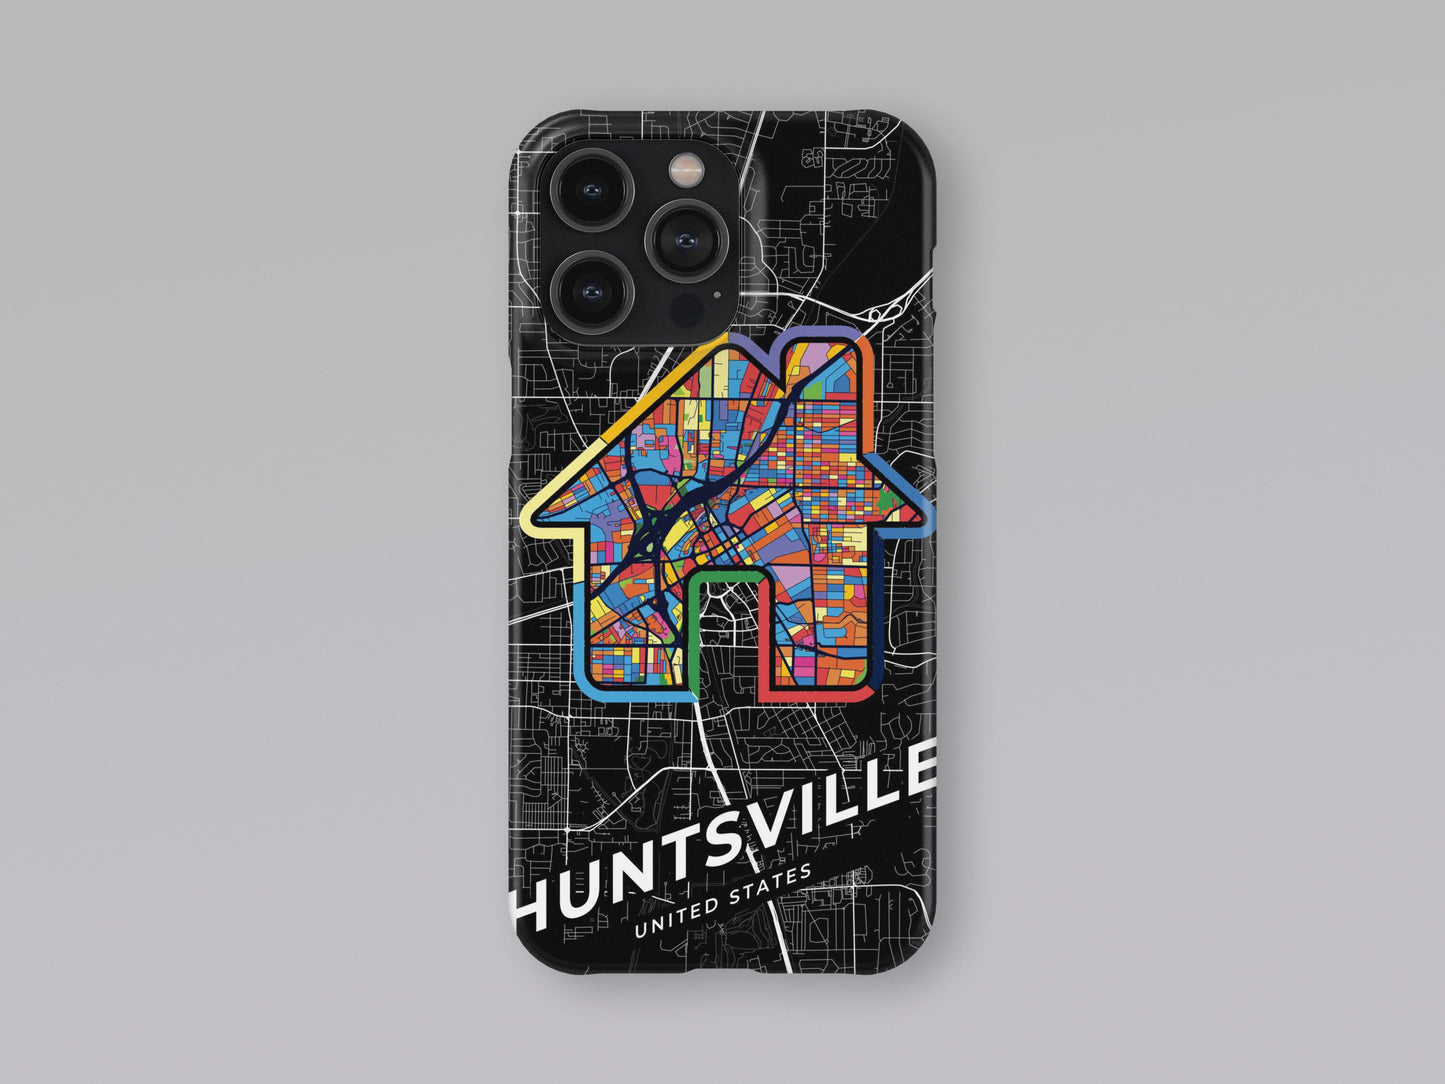 Huntsville Alabama slim phone case with colorful icon. Birthday, wedding or housewarming gift. Couple match cases. 3